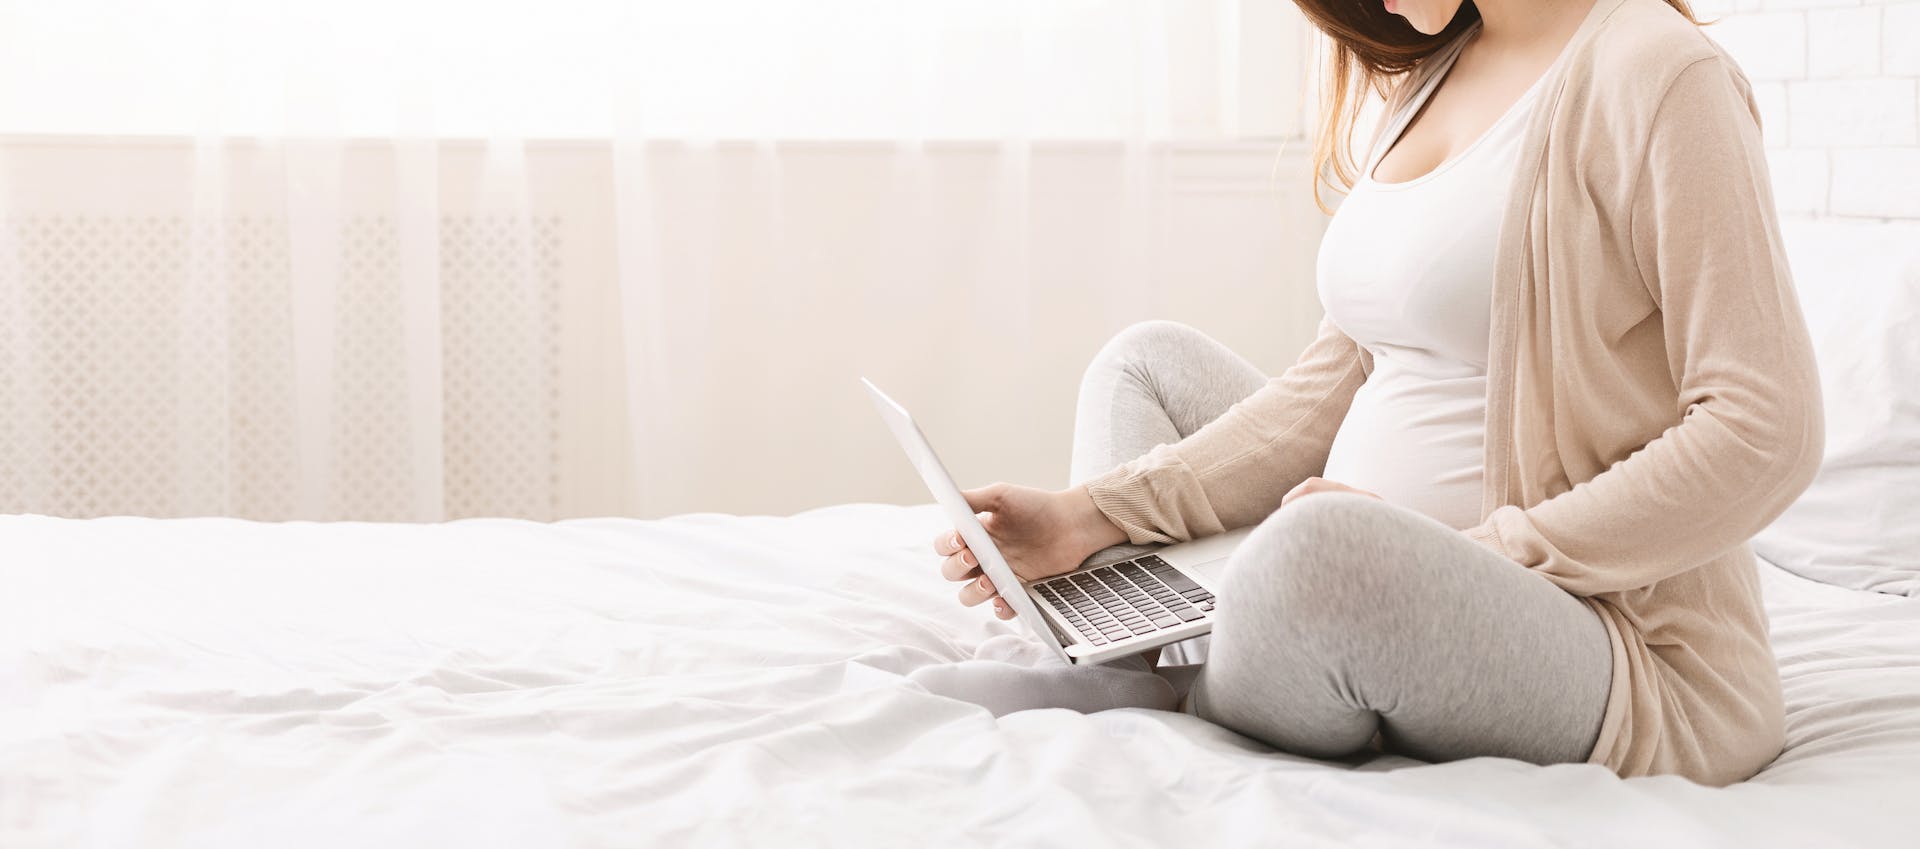 pregnant mother reading from the laptop on the bed